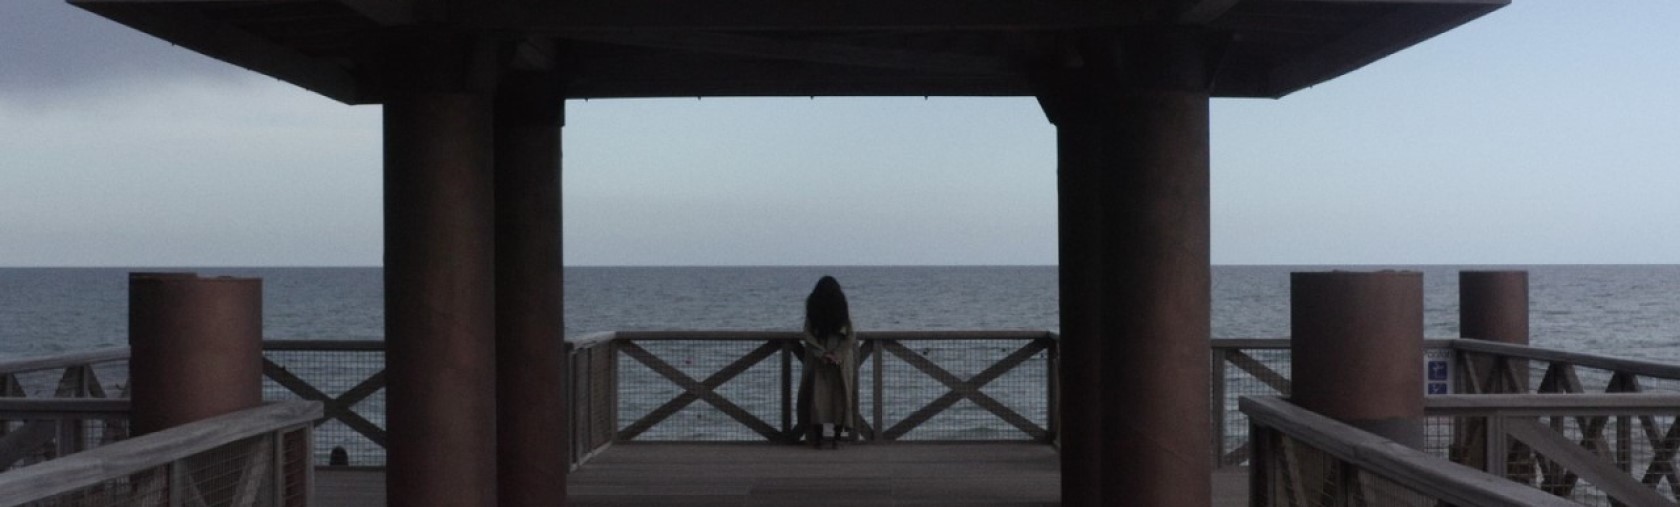 Person stands at end of pier, looking out at water